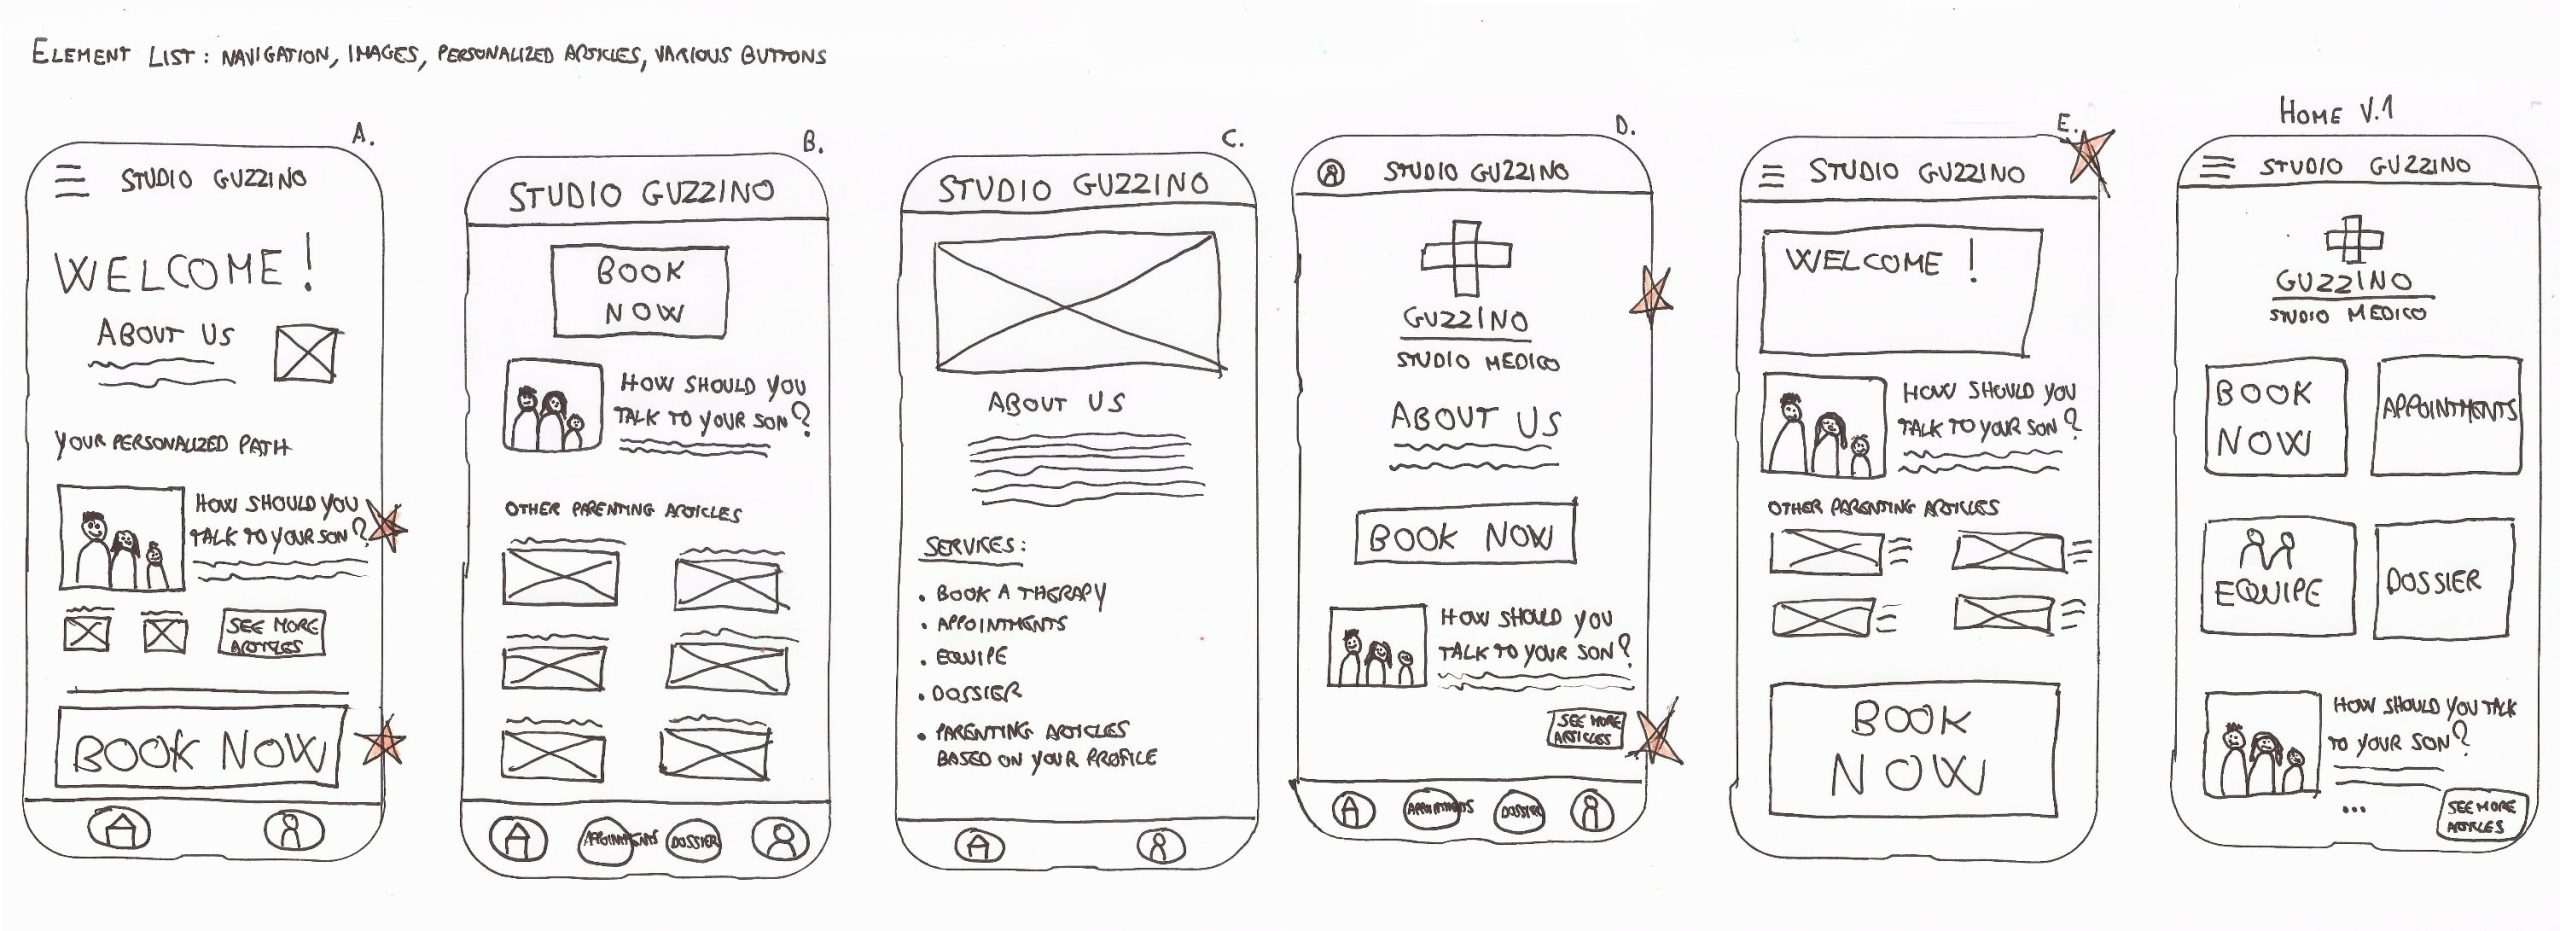 Five paper wireframes for ideating app